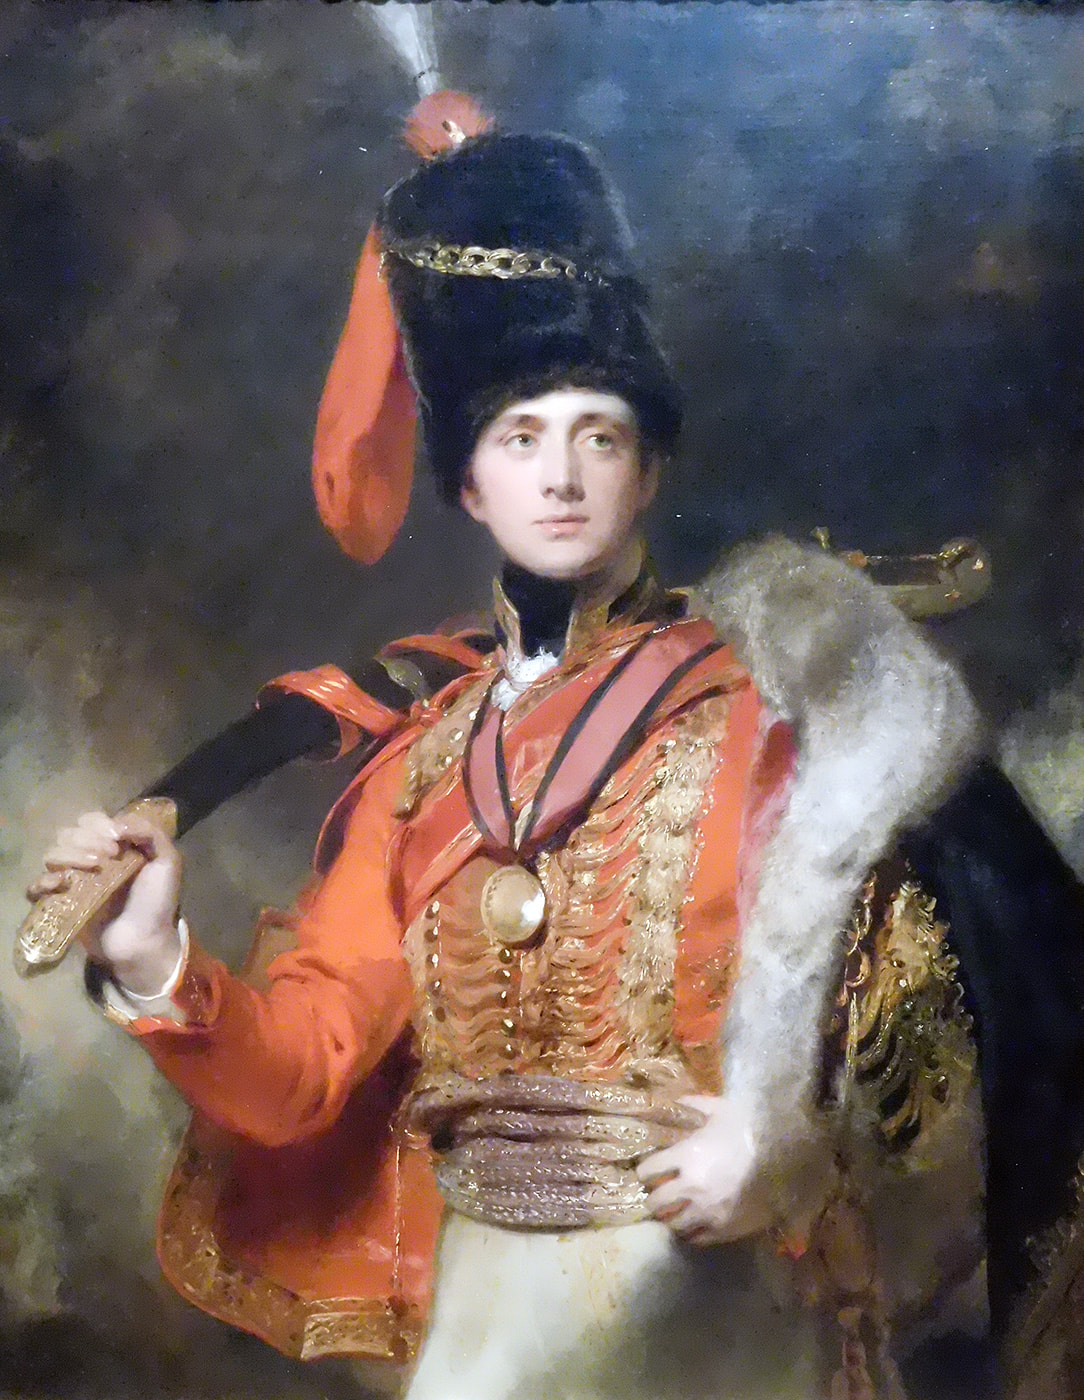 Painting by Sir Thomas Lawrence